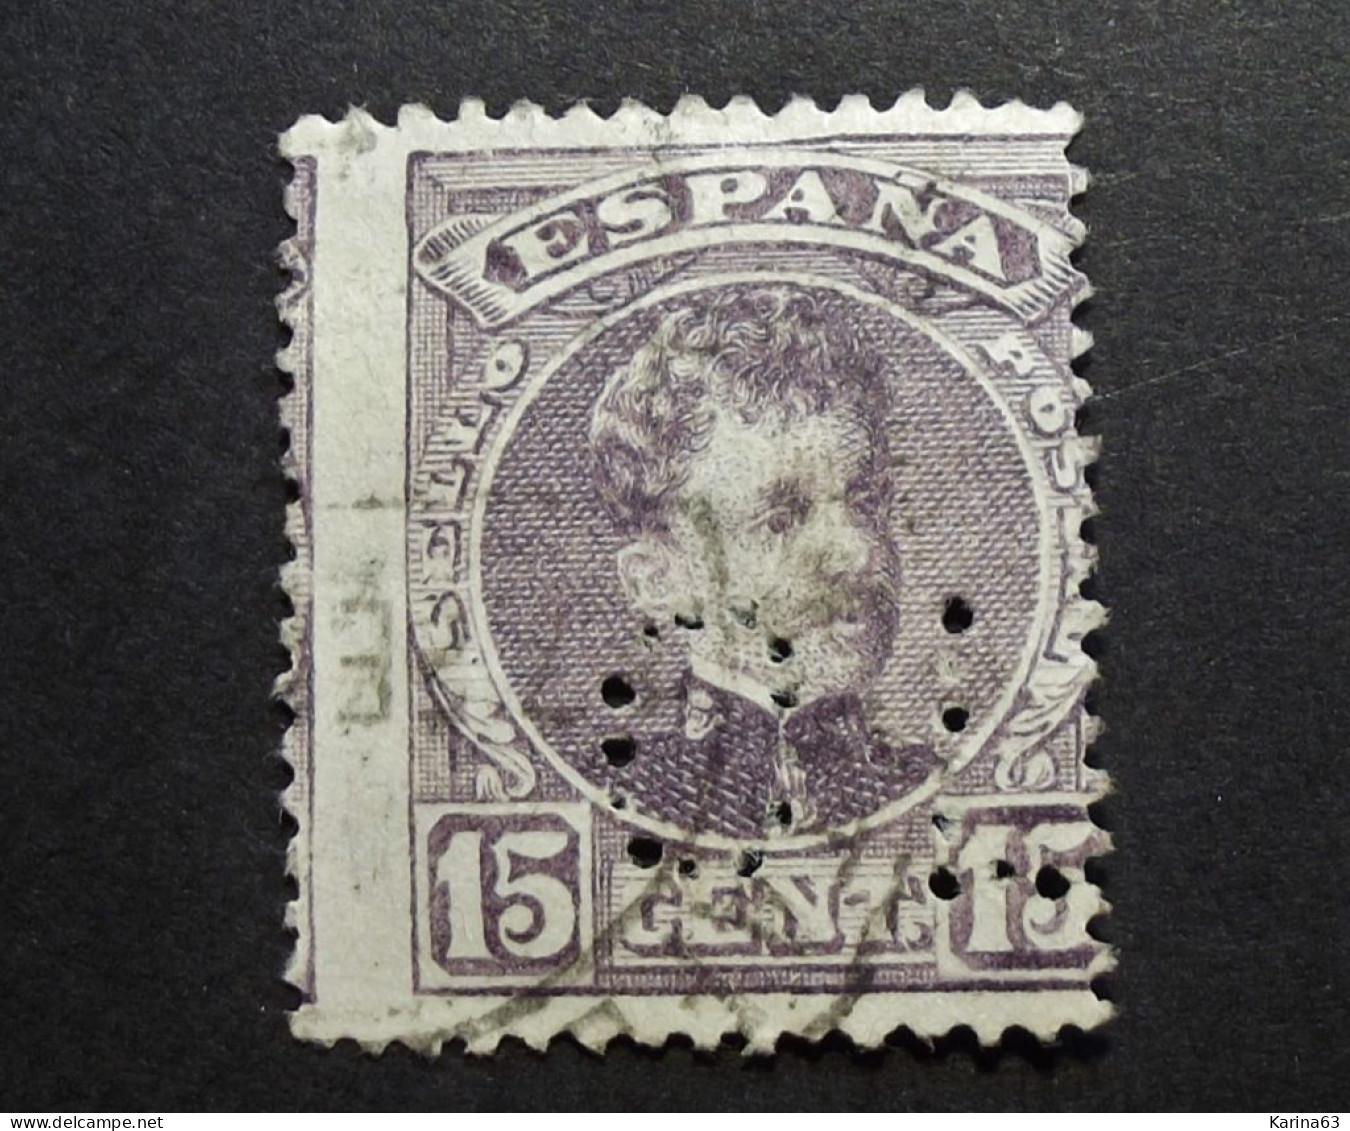 Espana - Spain - Alfonso XIII -  Perfin - Lochung  With Number - C L - Credito Lyones - Cancelled - Gebraucht